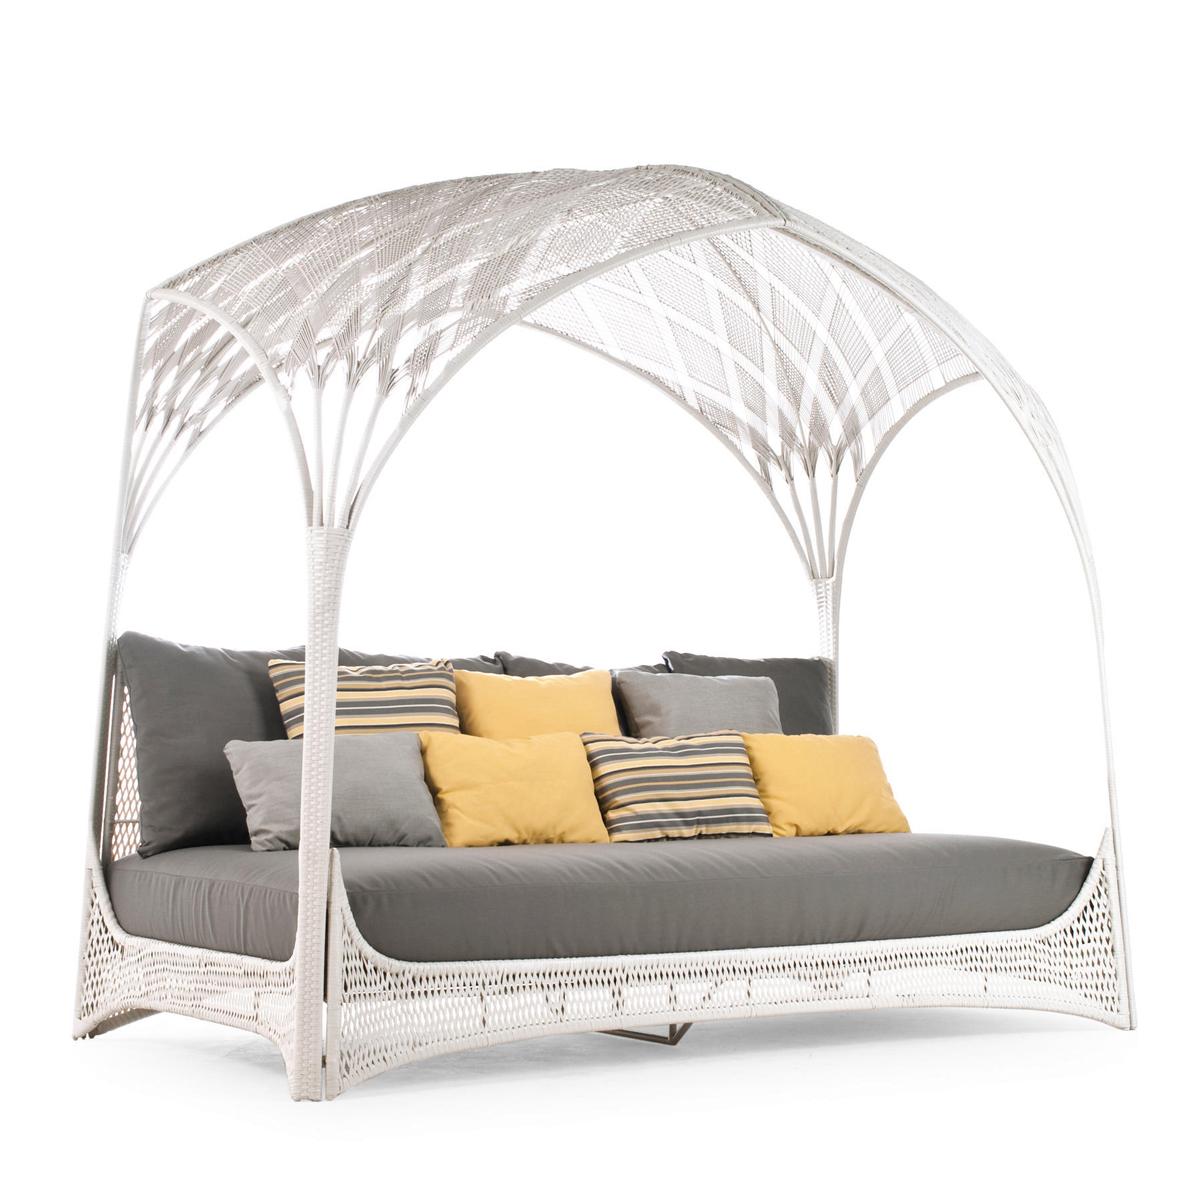 Contemporary Hanging Daybed Indoor or Outdoor For Sale